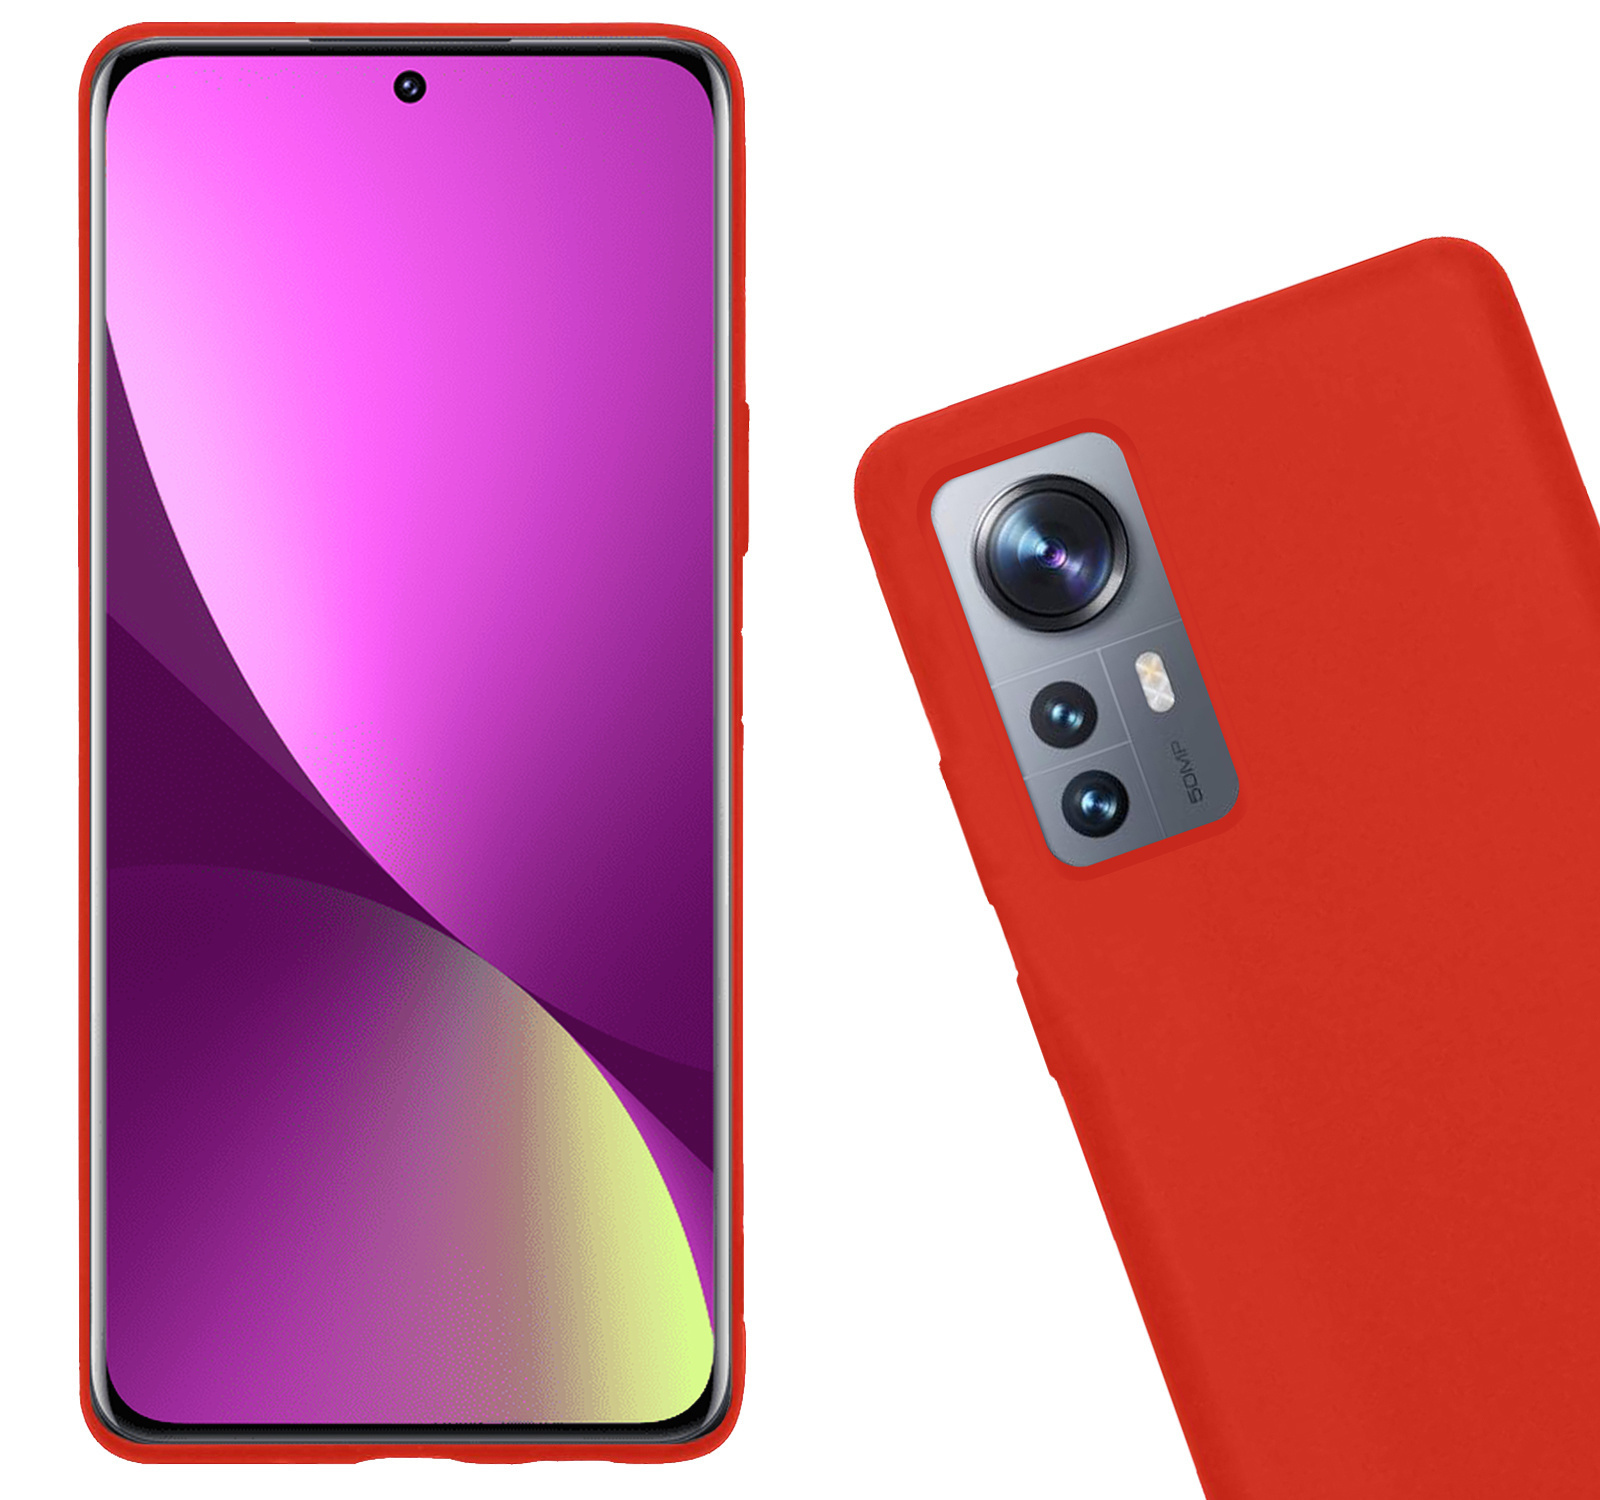 Nomfy Xiaomi 12 Pro Hoesje Siliconen Case Back Cover Met 2x Screenprotector - Xiaomi 12 Pro Hoes Cover Silicone - Rood